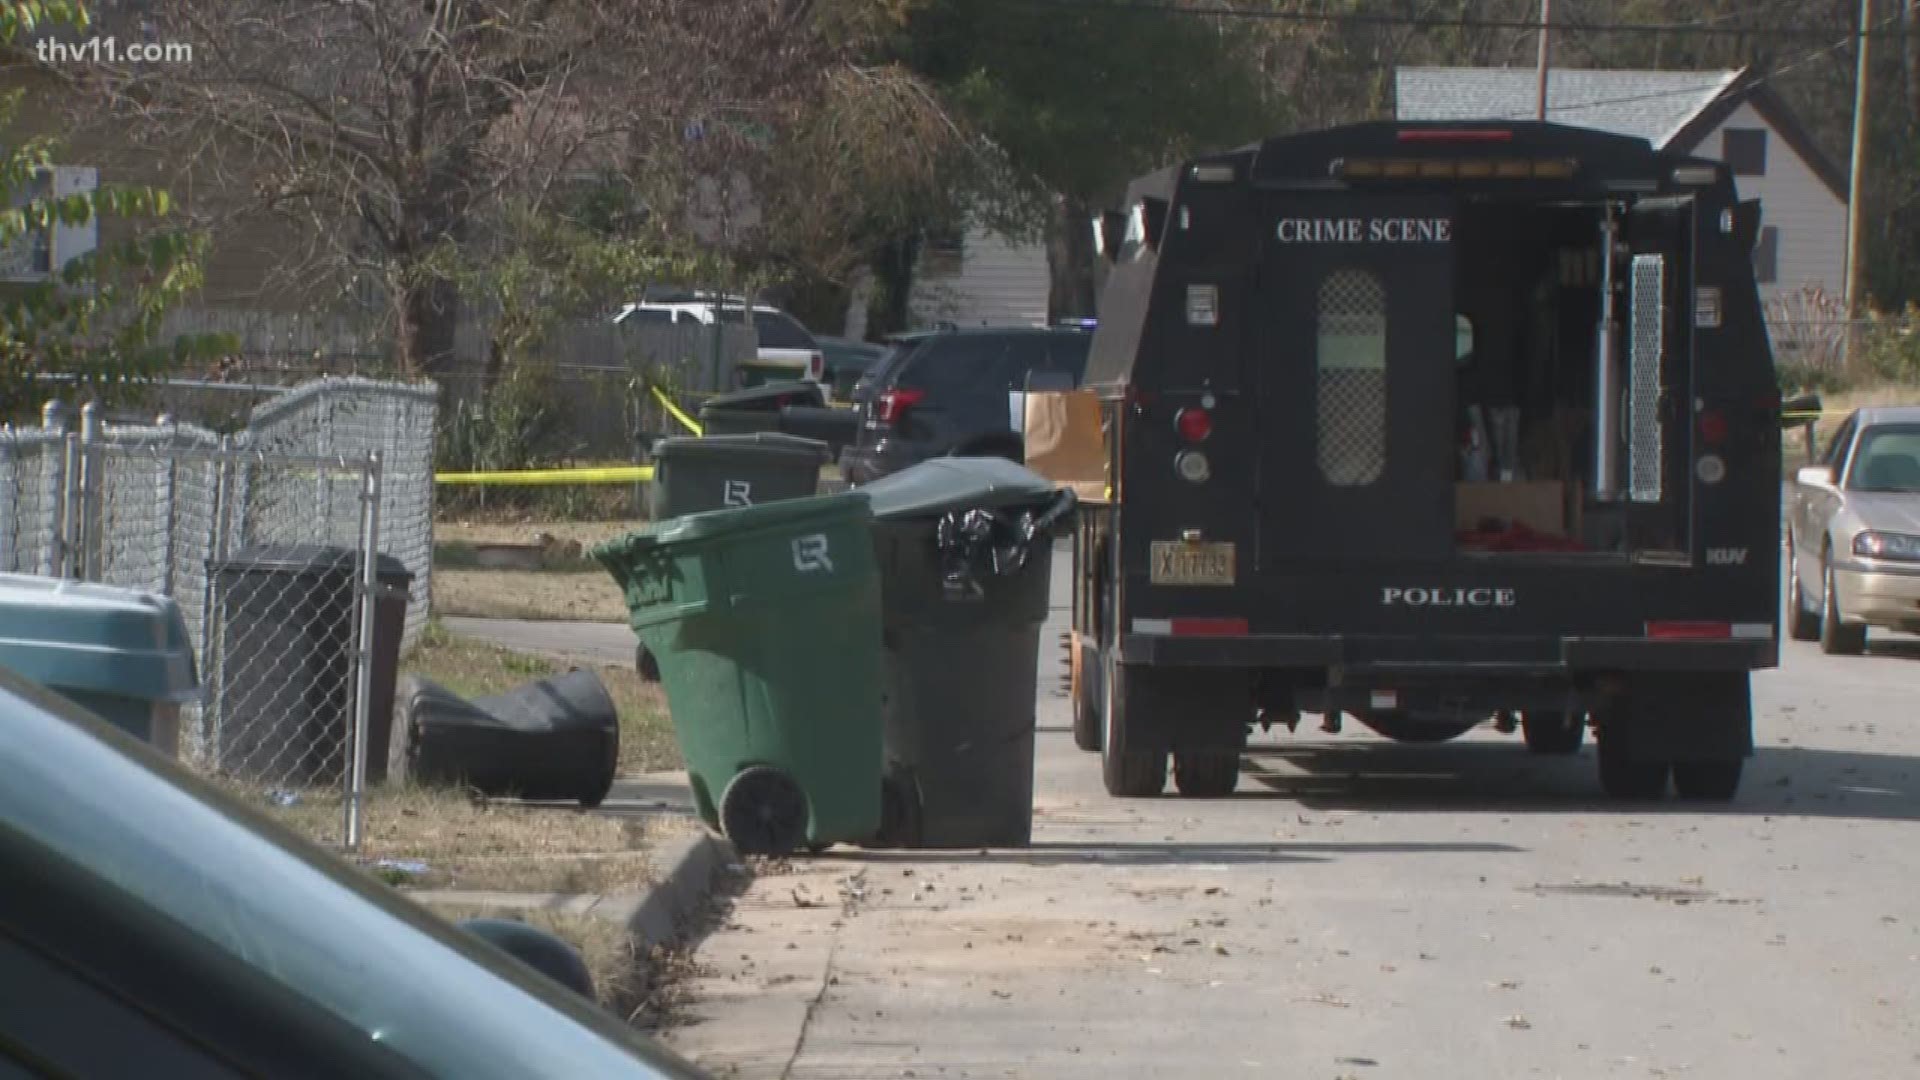 Shortly after 3 a.m., officers responded to a home on 17th Street, where they found a body.